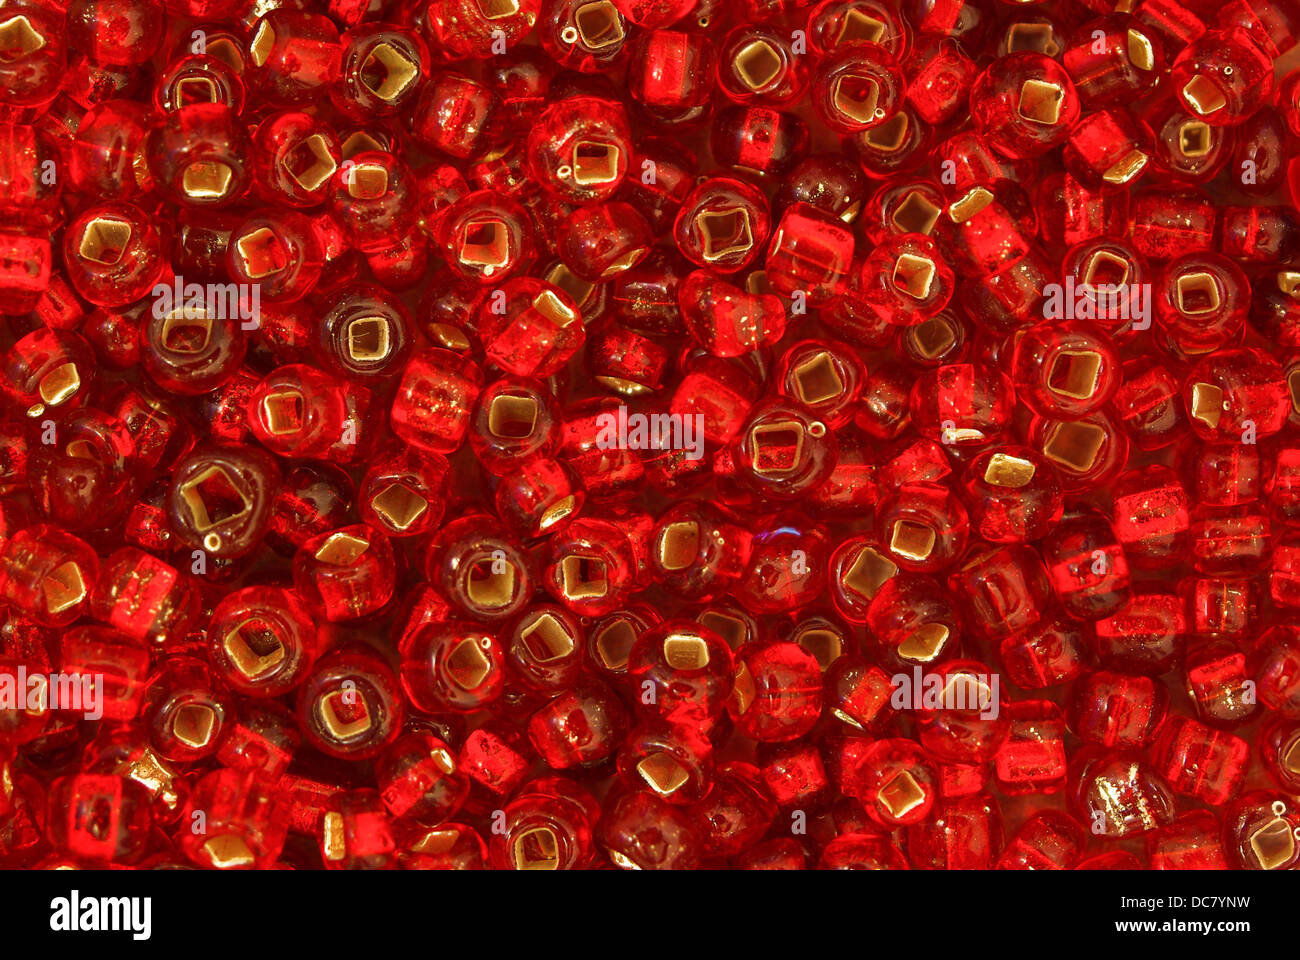 Colourful wooden craft beads pattern Stock Photo - Alamy